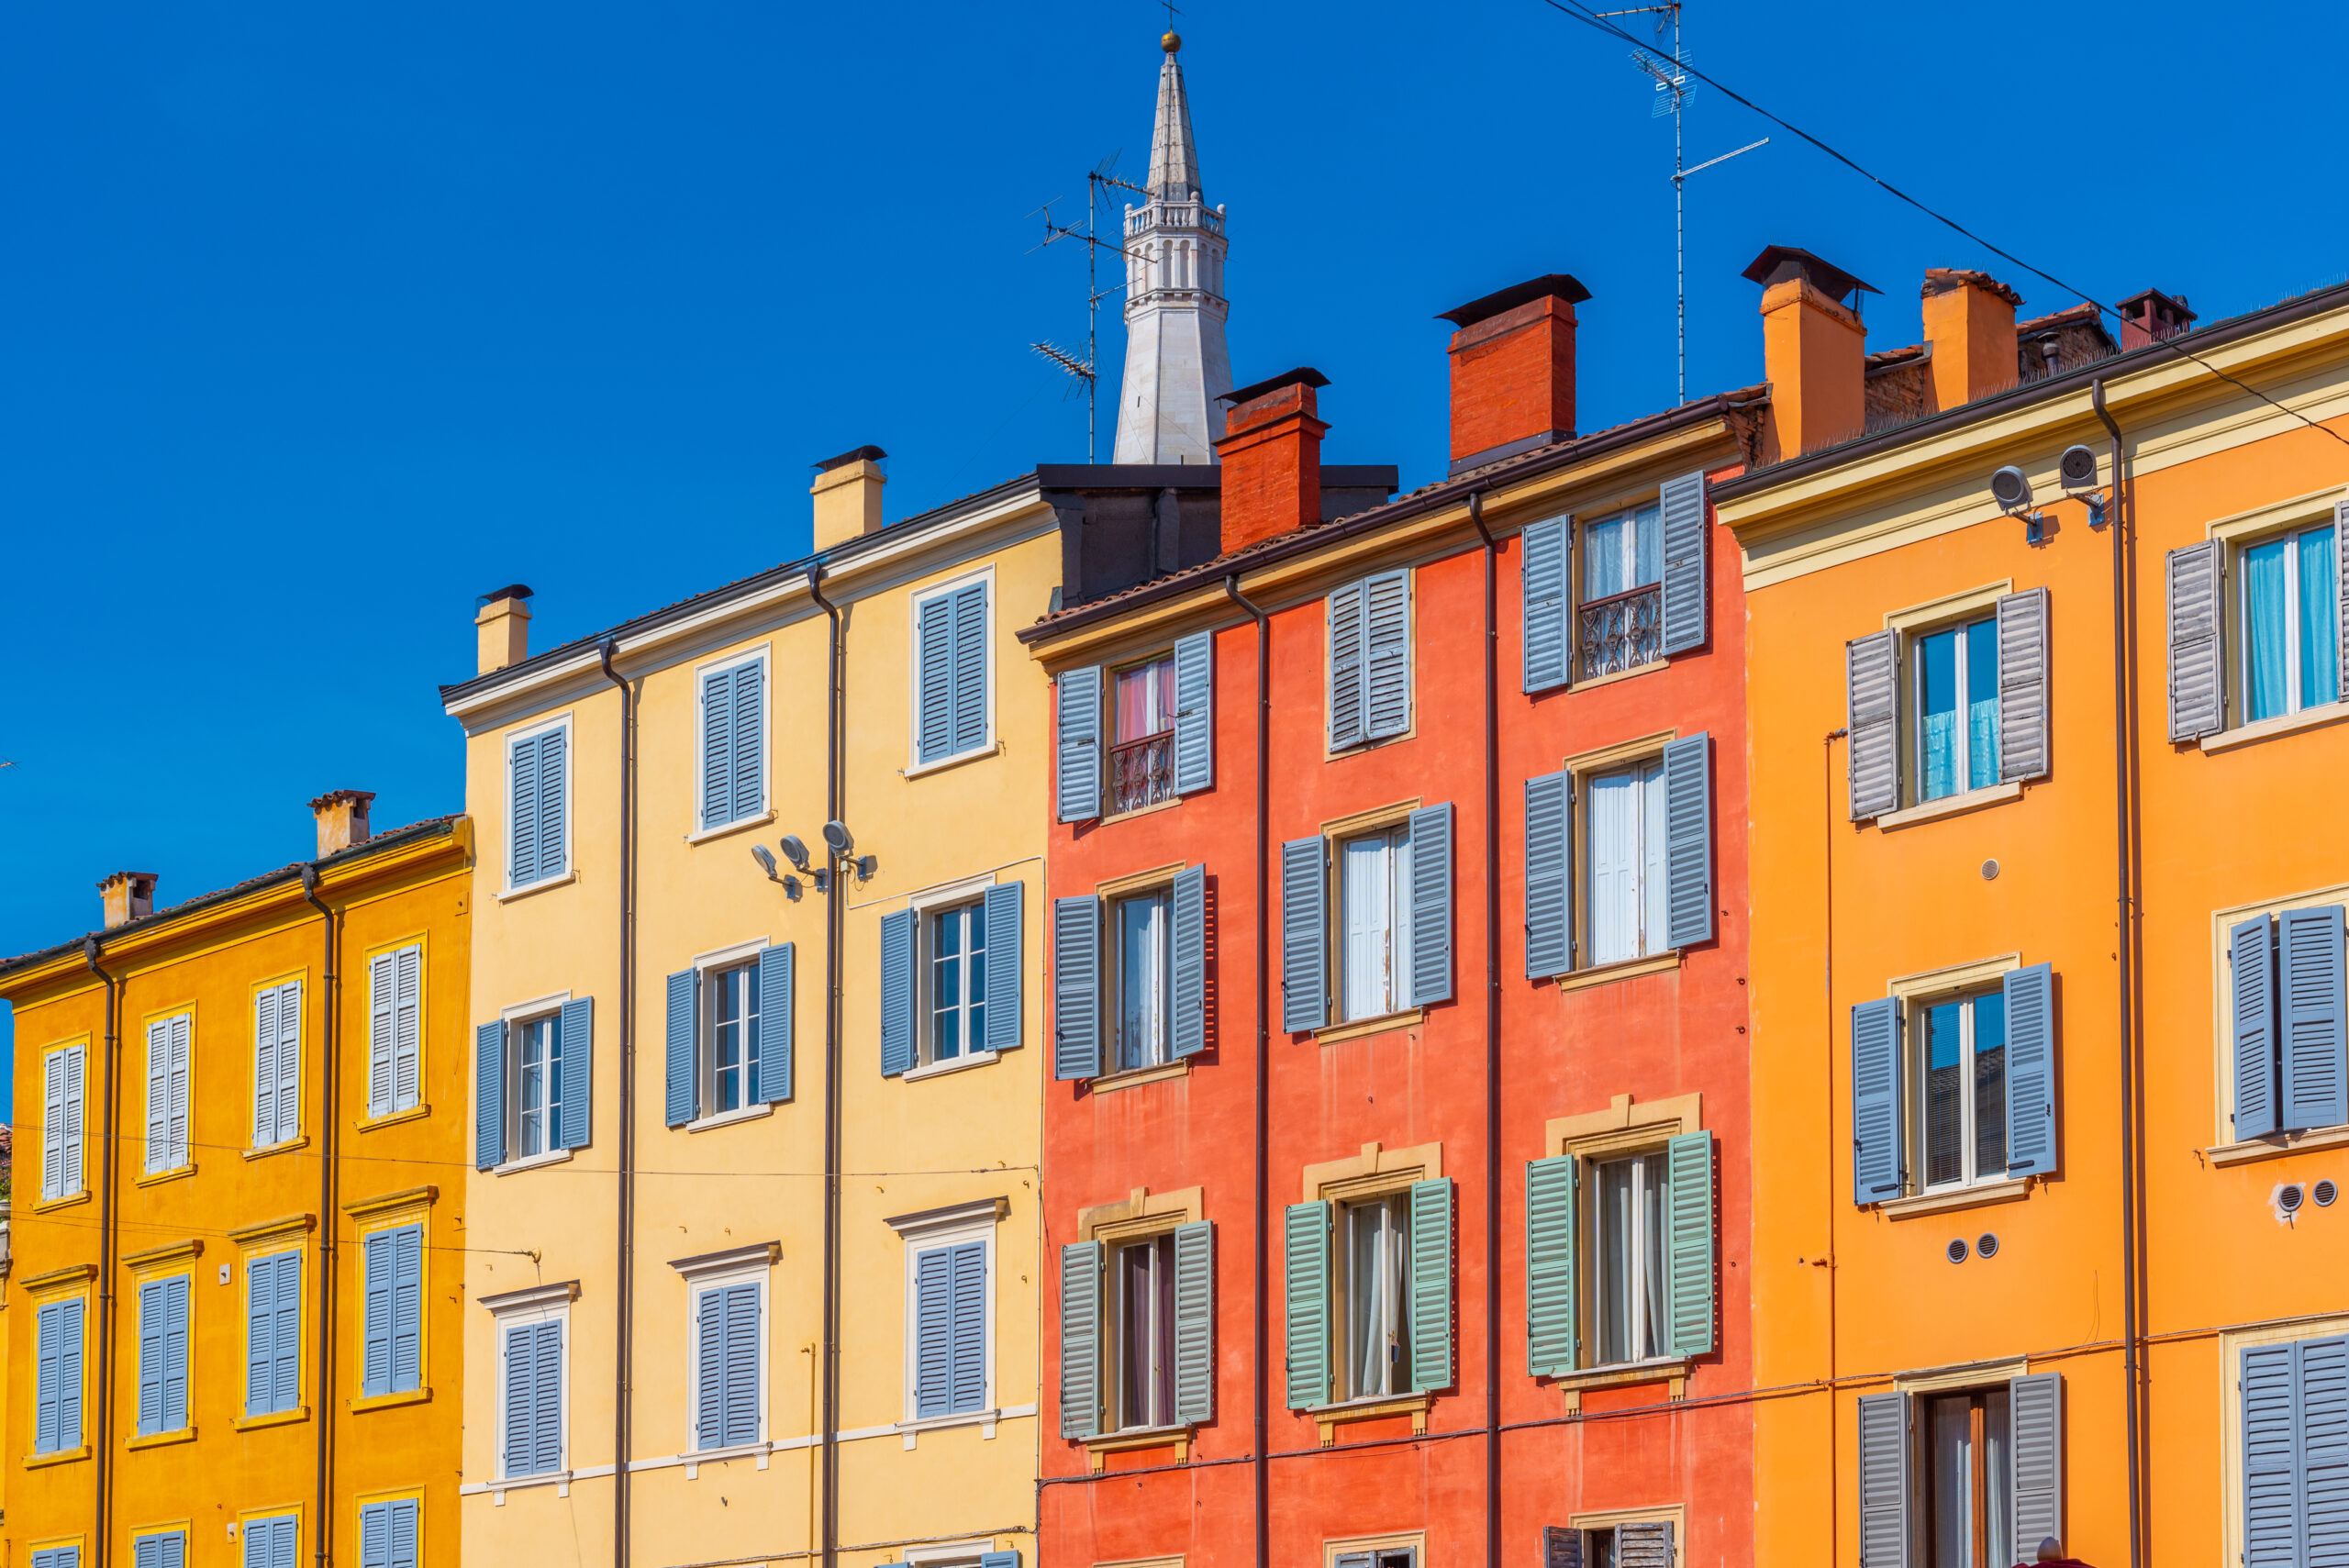 Colorful facades of historical building in Italian town Modena.